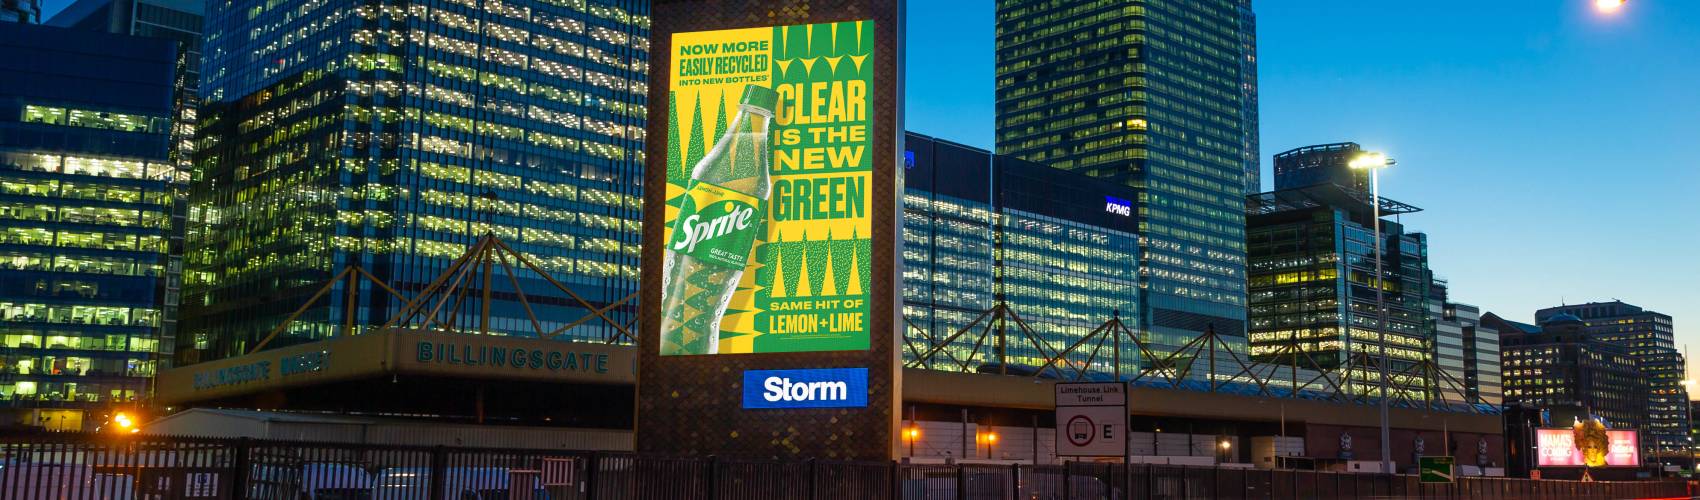 Yellow and green Sprite Storm ad at night with cars driving past